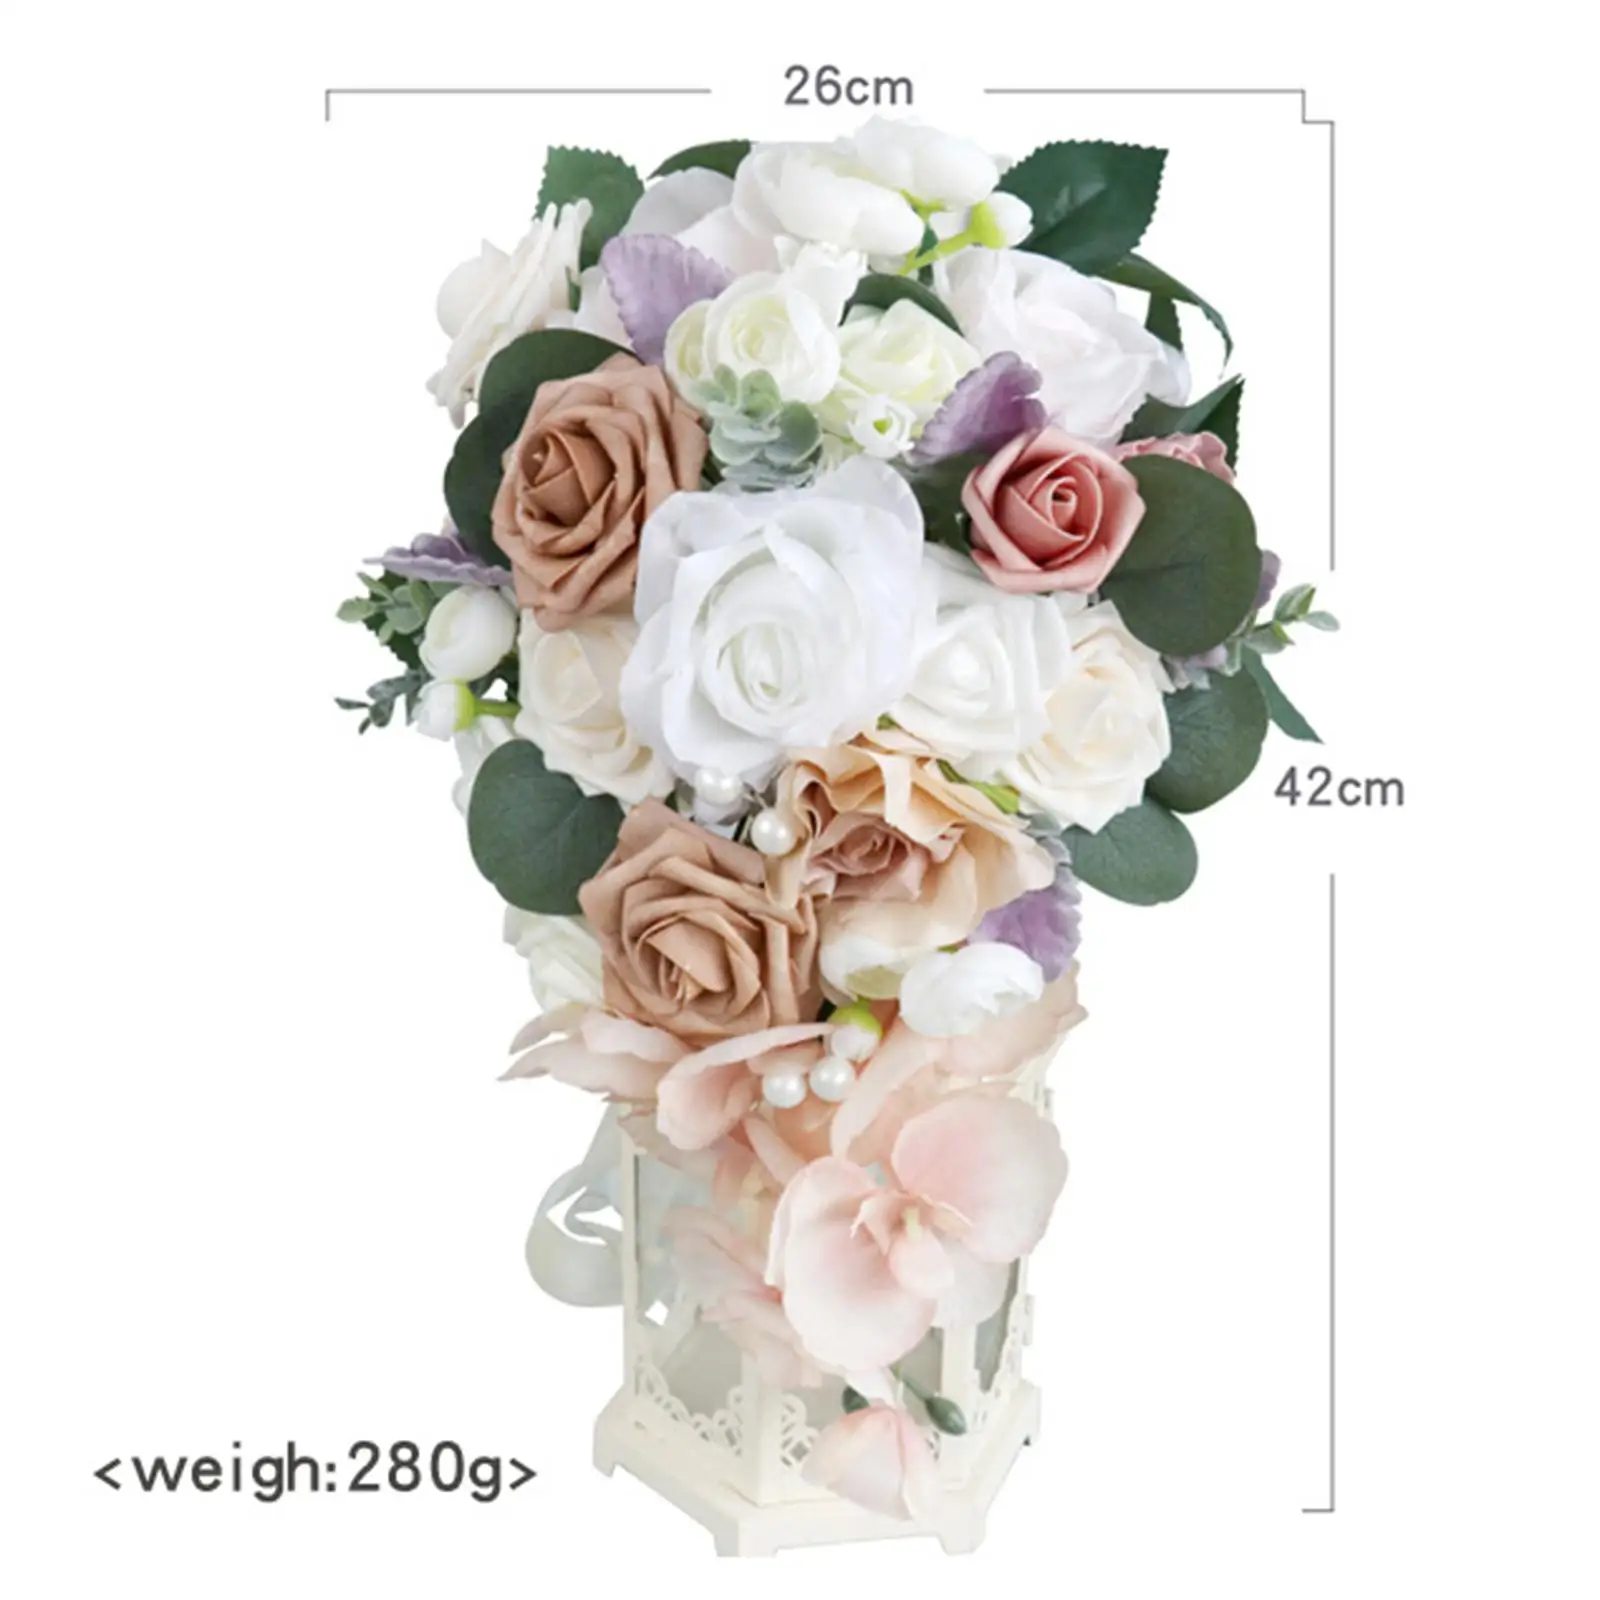 Artificial Holding Flower Decorative Romantic Wedding Holding Bouquet for Party Ceremony